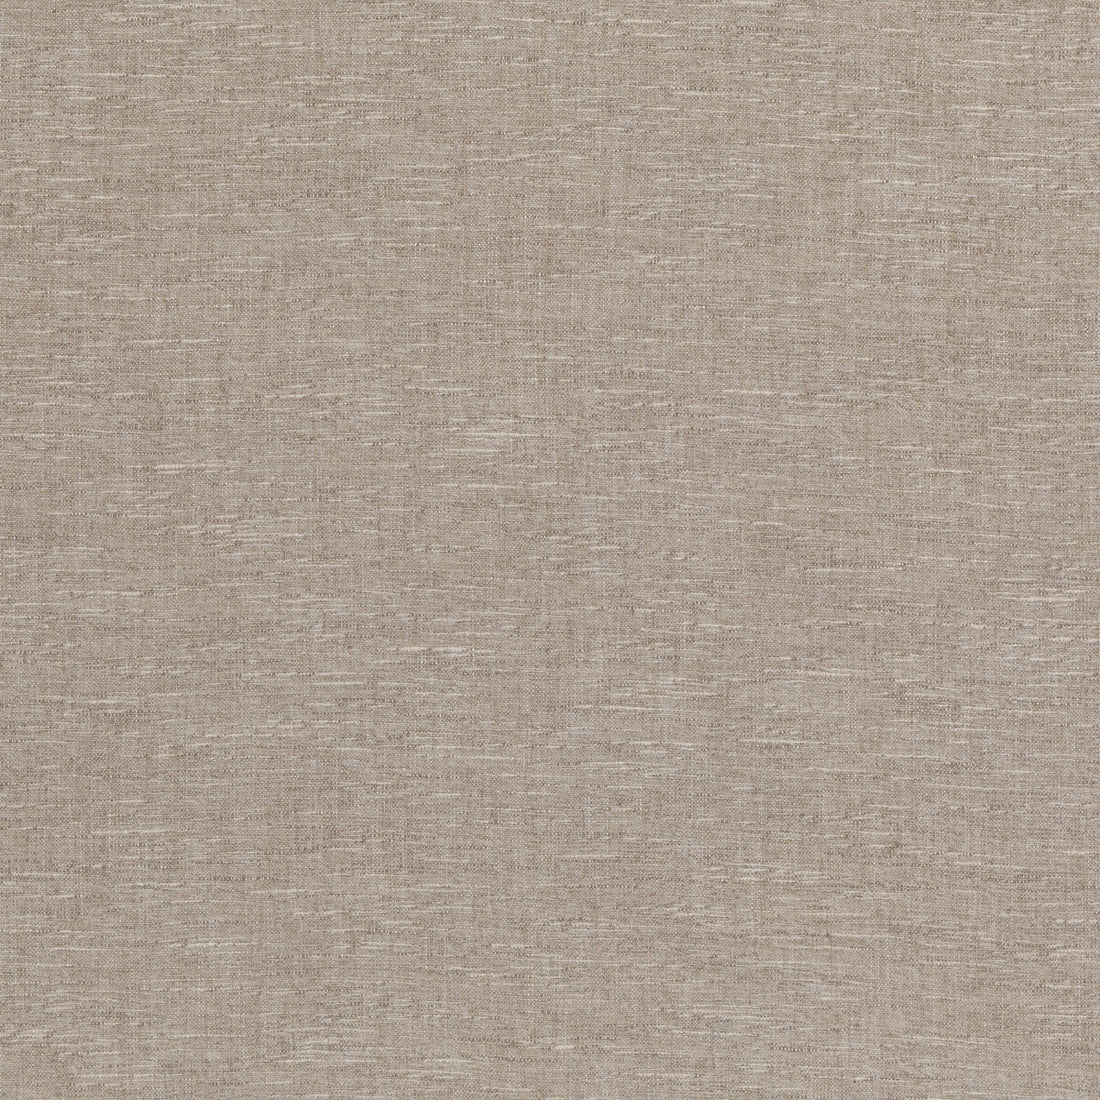 Drumlin fabric in linen color - pattern ED85374.110.0 - by Threads in the Quintessential Textures collection